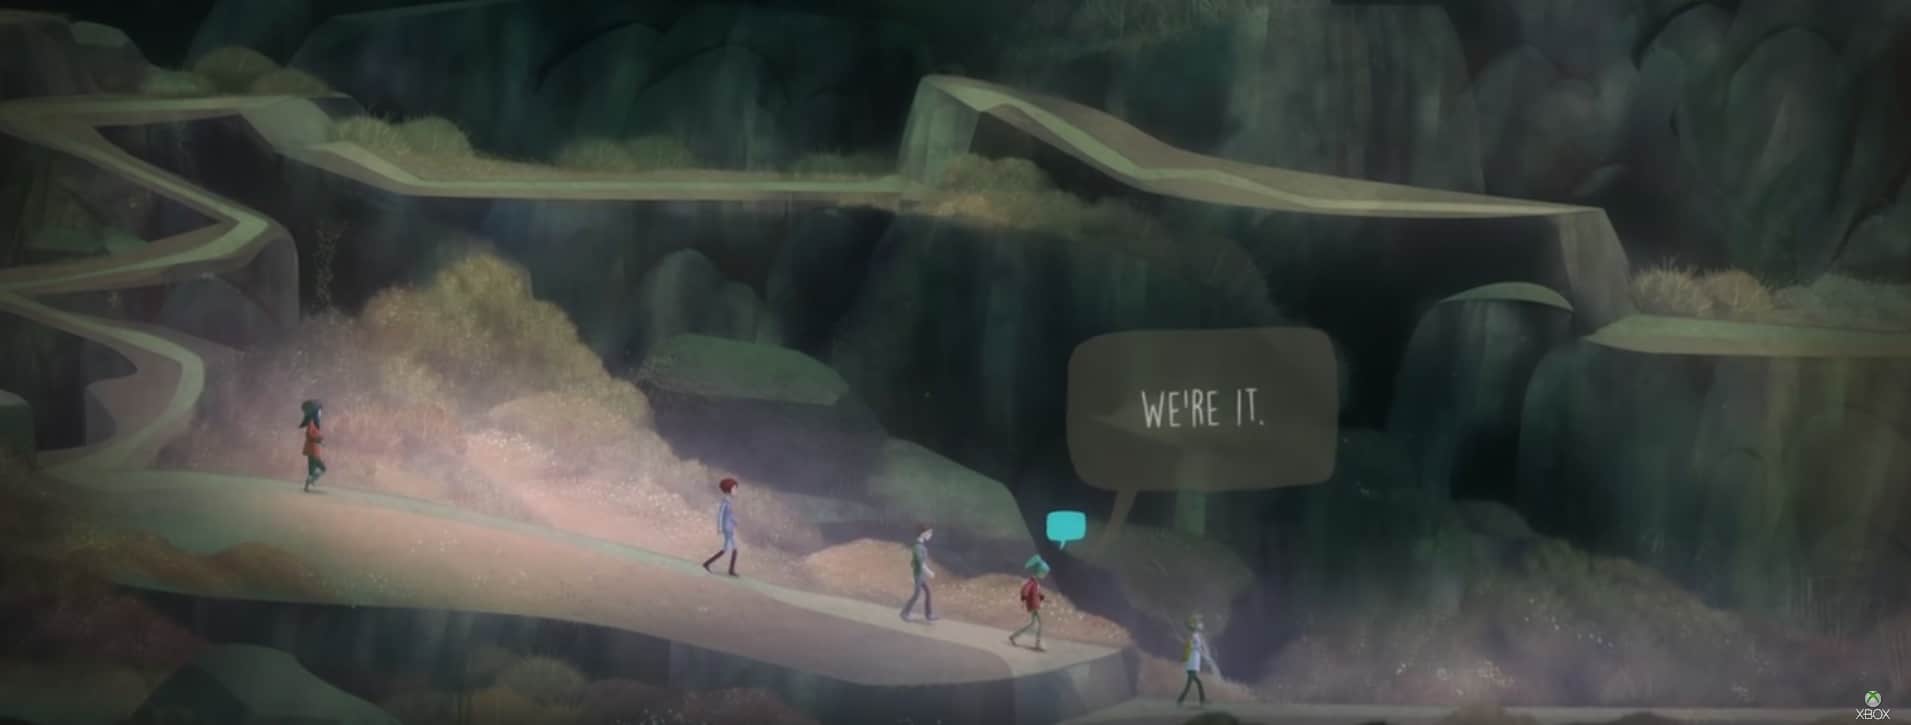 Adventure thriller game OXENFREE coming to Xbox One and Windows in January - OnMSFT.com - October 26, 2015